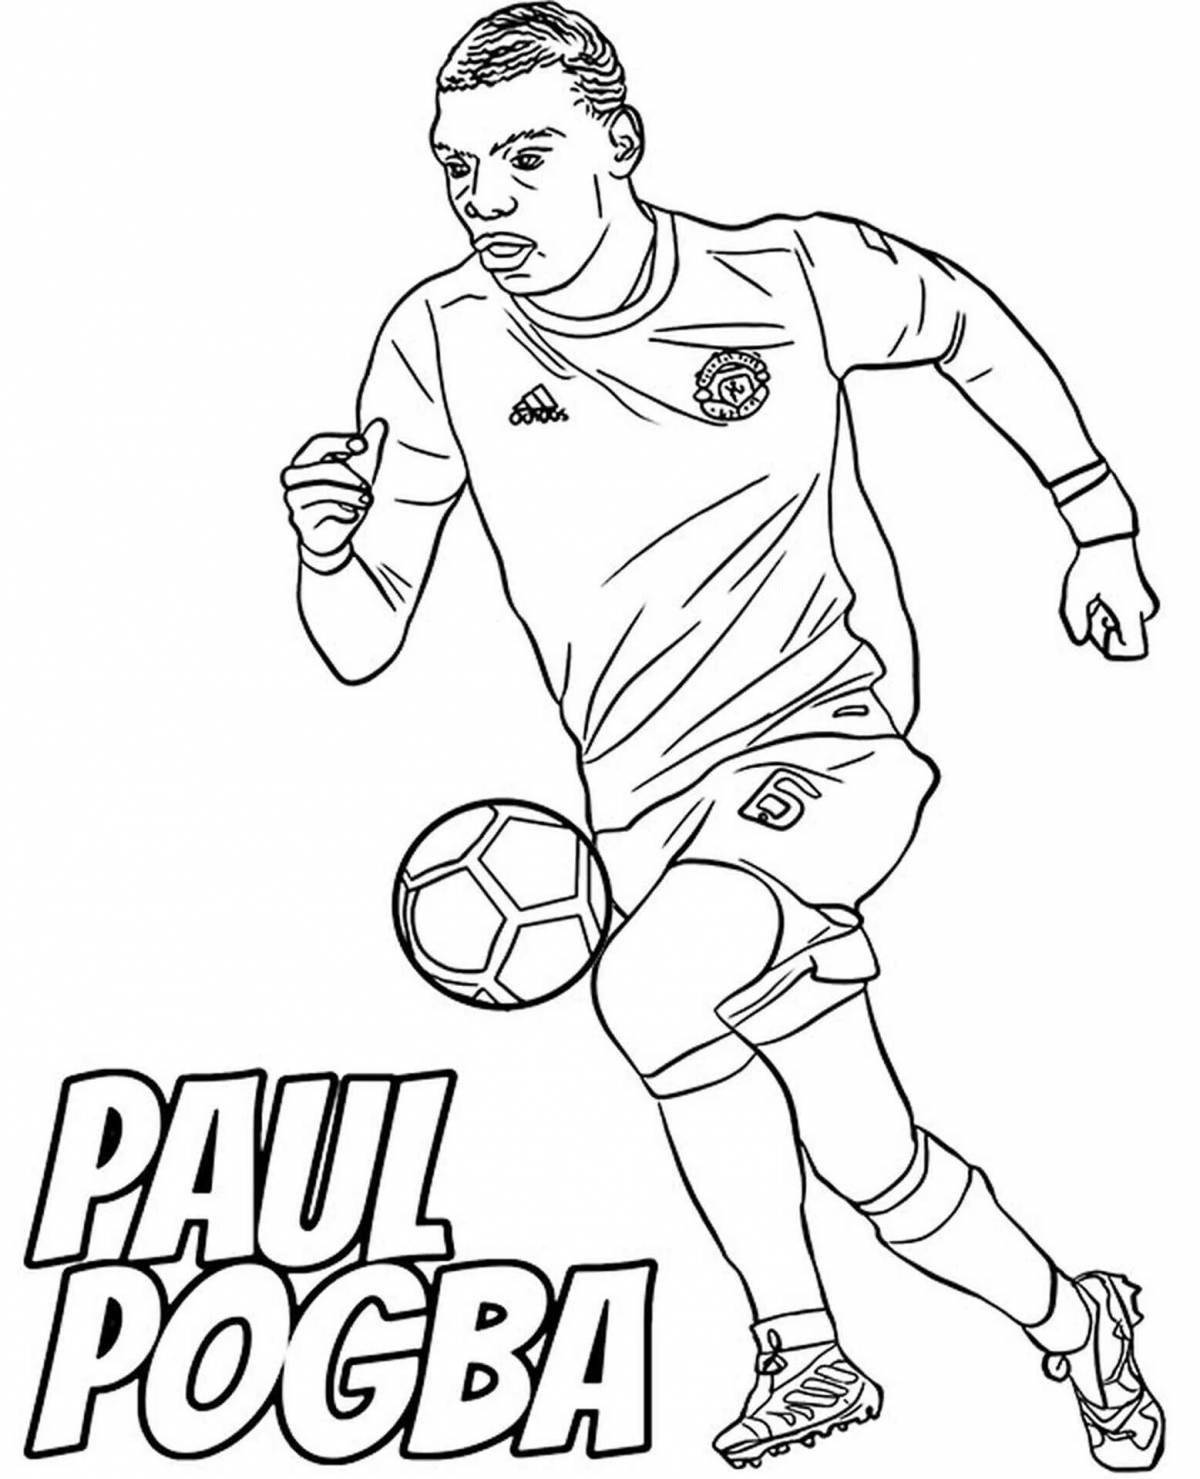 Coloring page nice football player